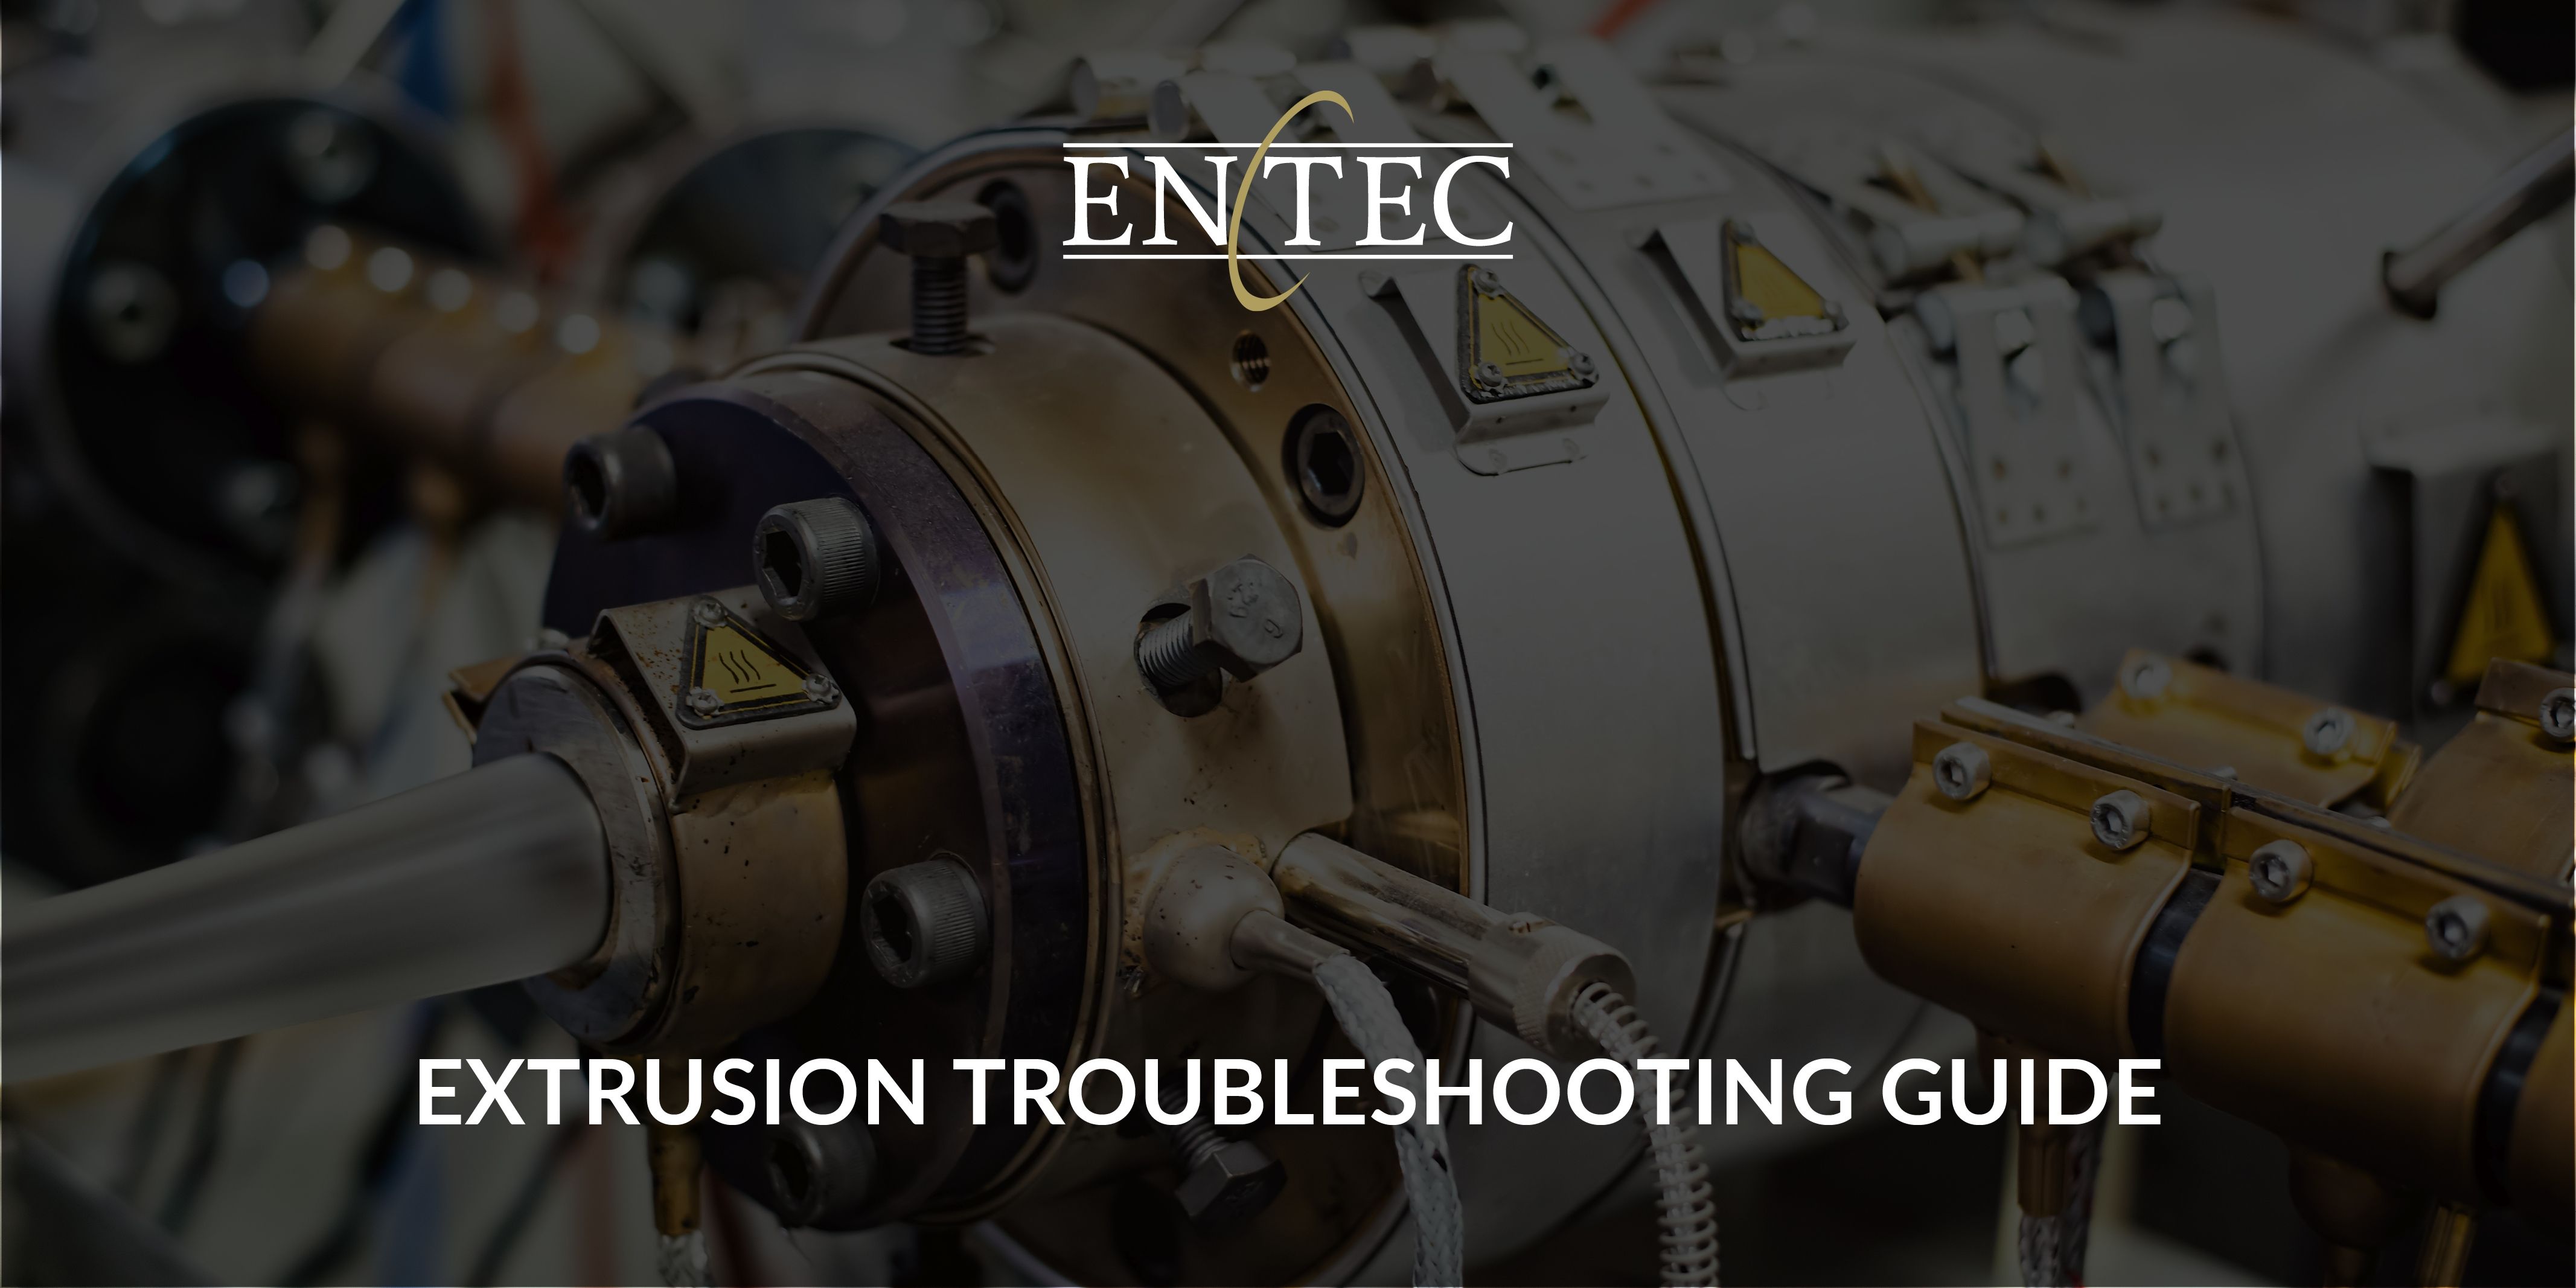 Extrusion Troubleshooting Guide Social Media Post